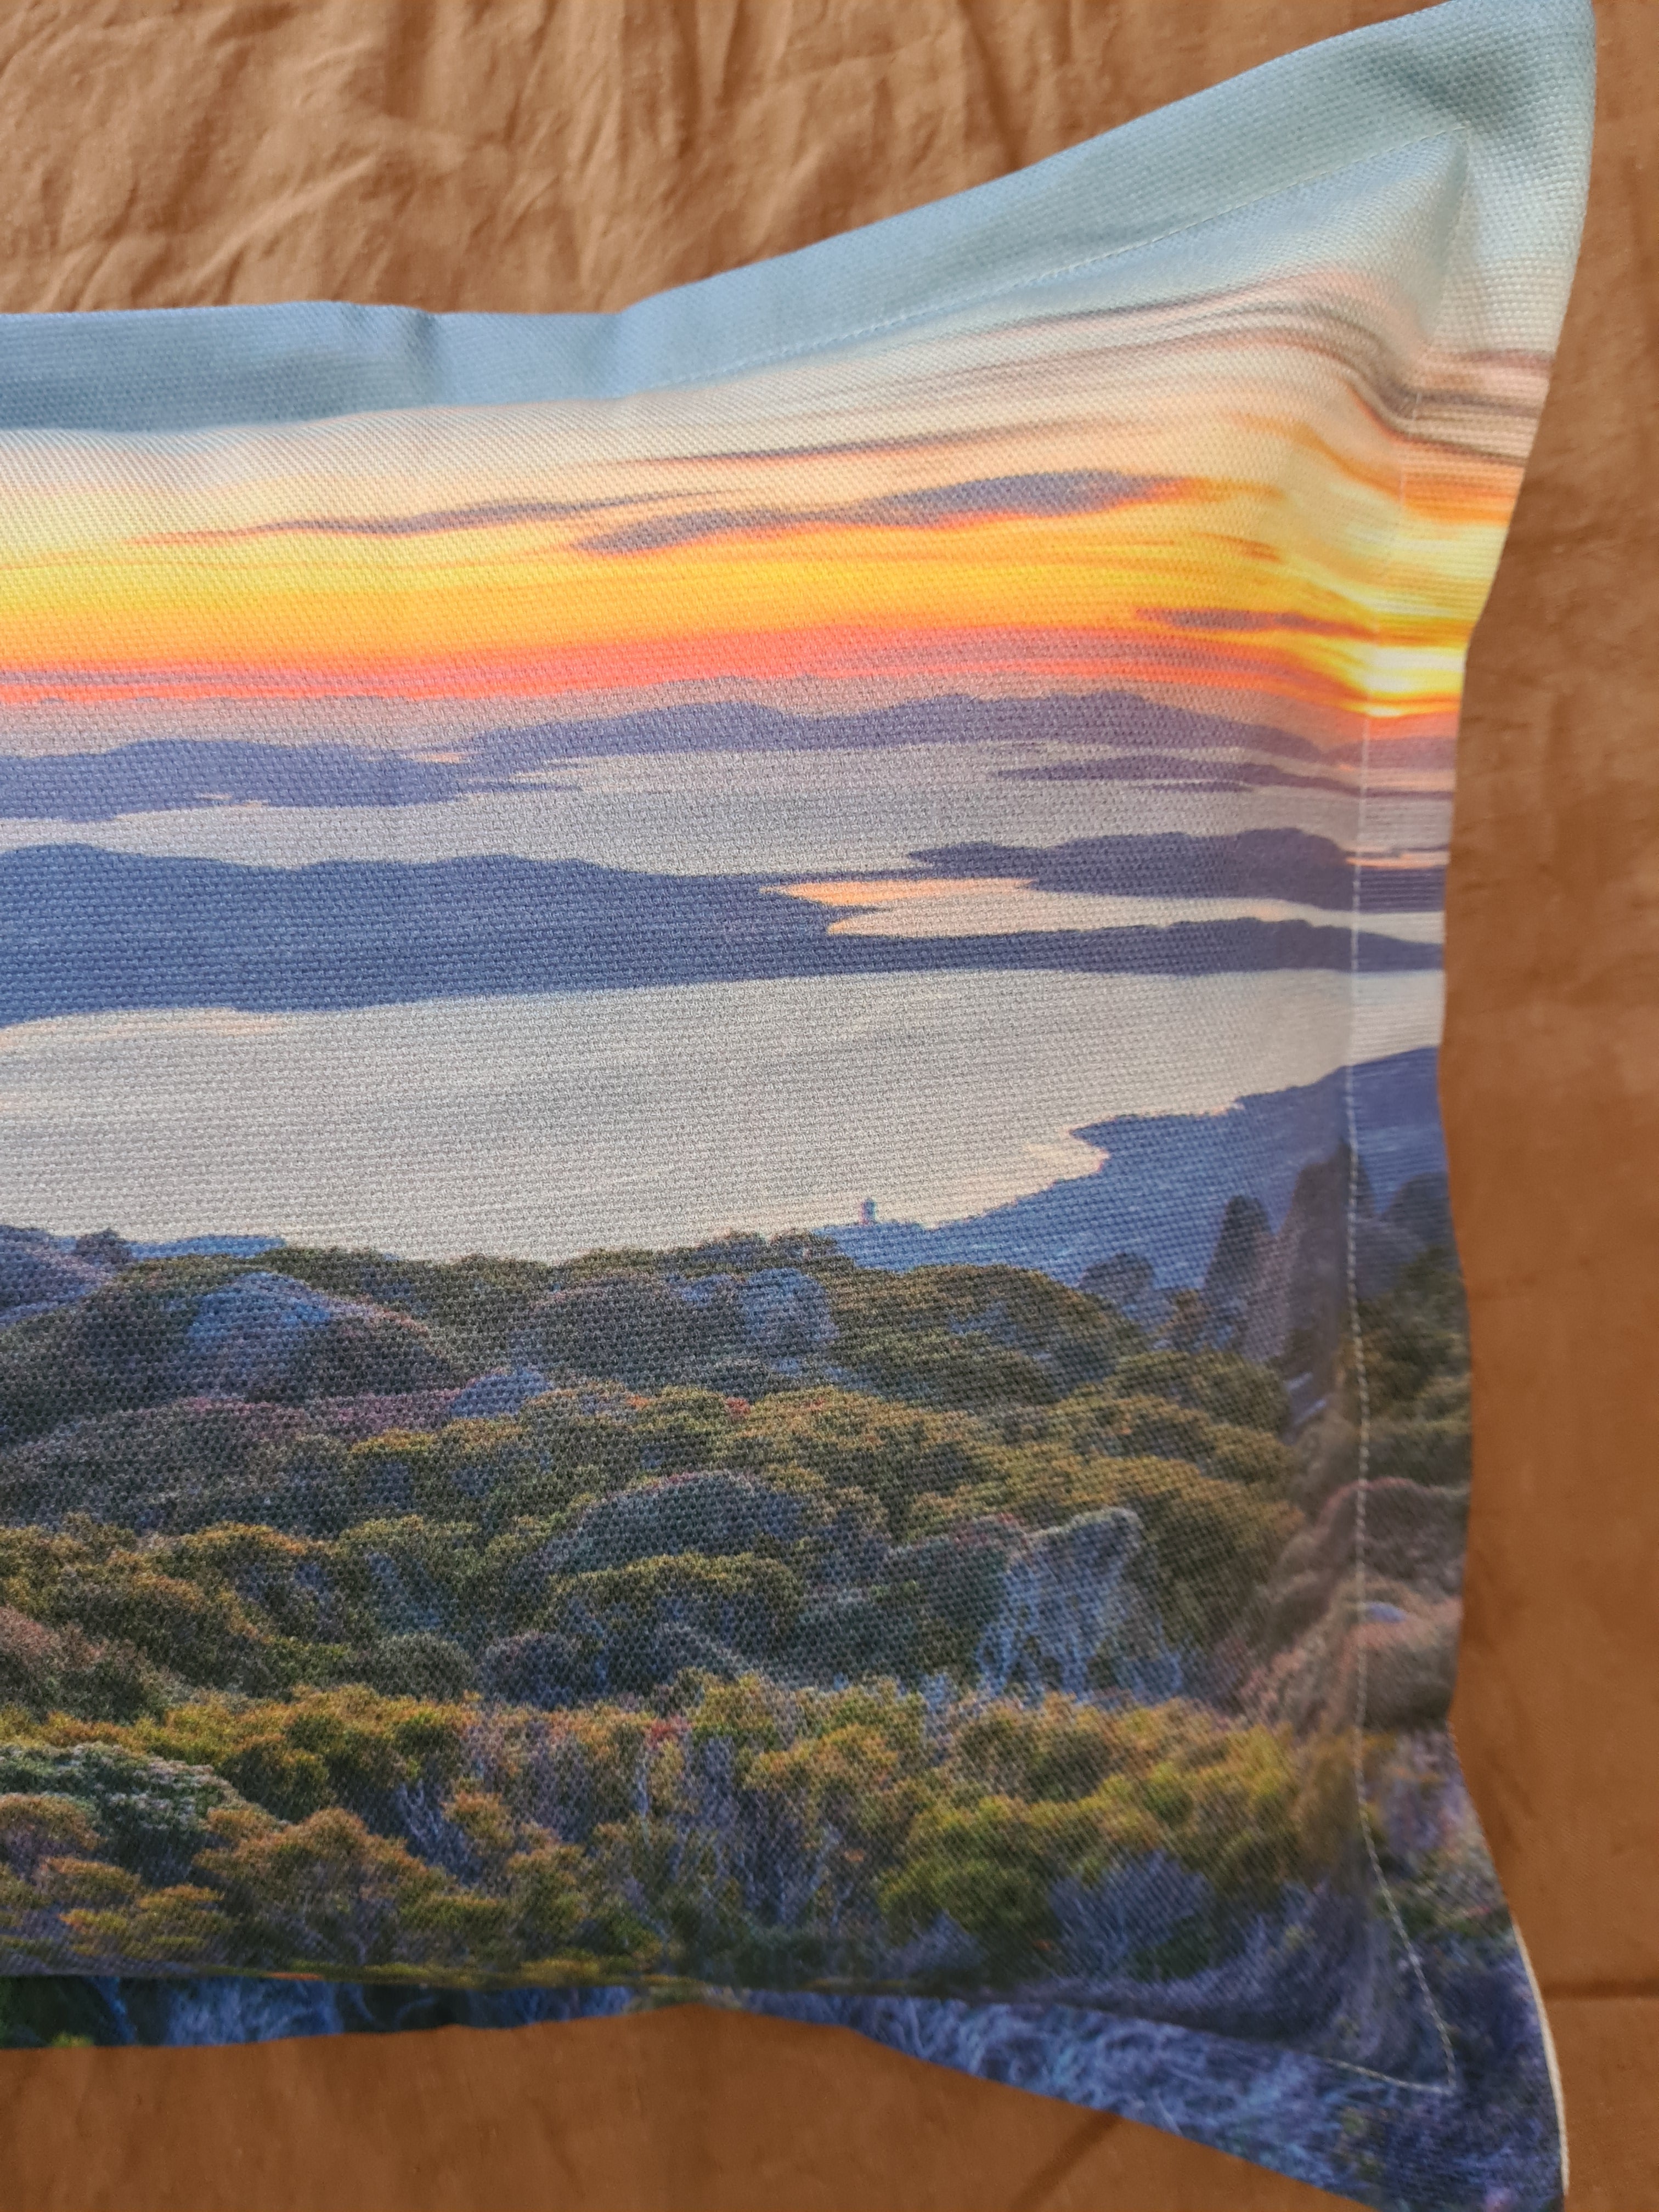 Printed Canvas Cushion - Mt Wellington/Kunanyi Cushions The Spotted Quoll 